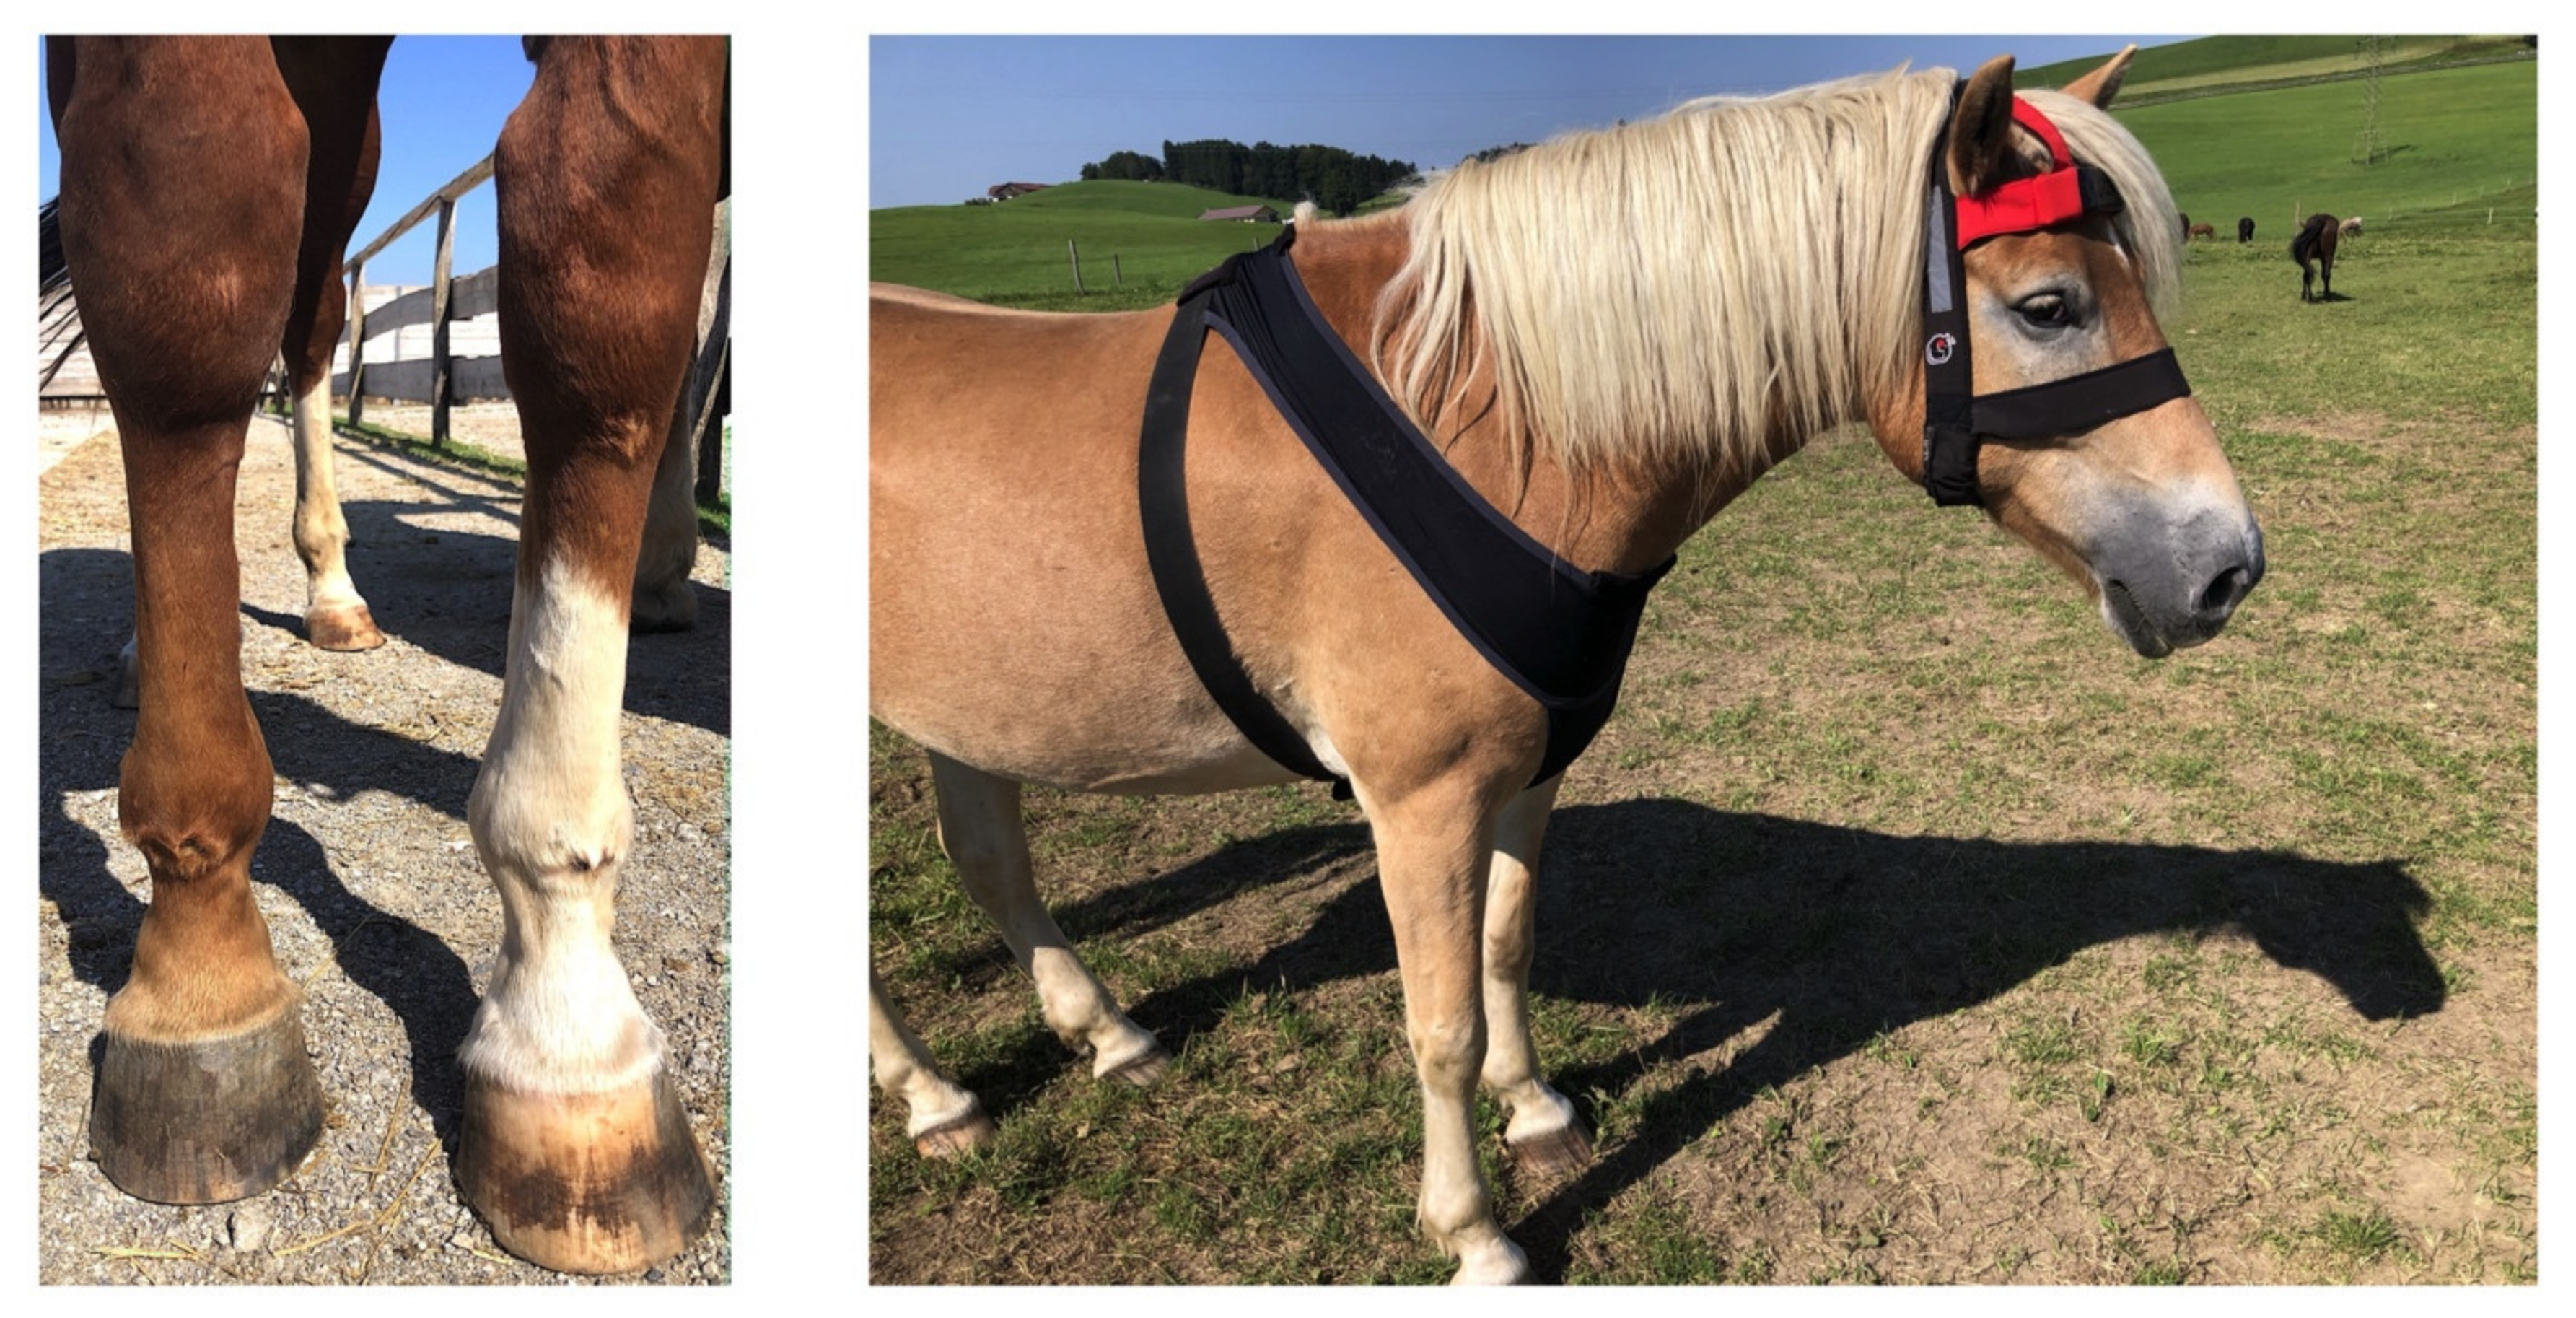 Animals | Free Full-Text | Recumbency as an Equine Welfare Indicator in  Geriatric Horses and Horses with Chronic Orthopaedic Disease